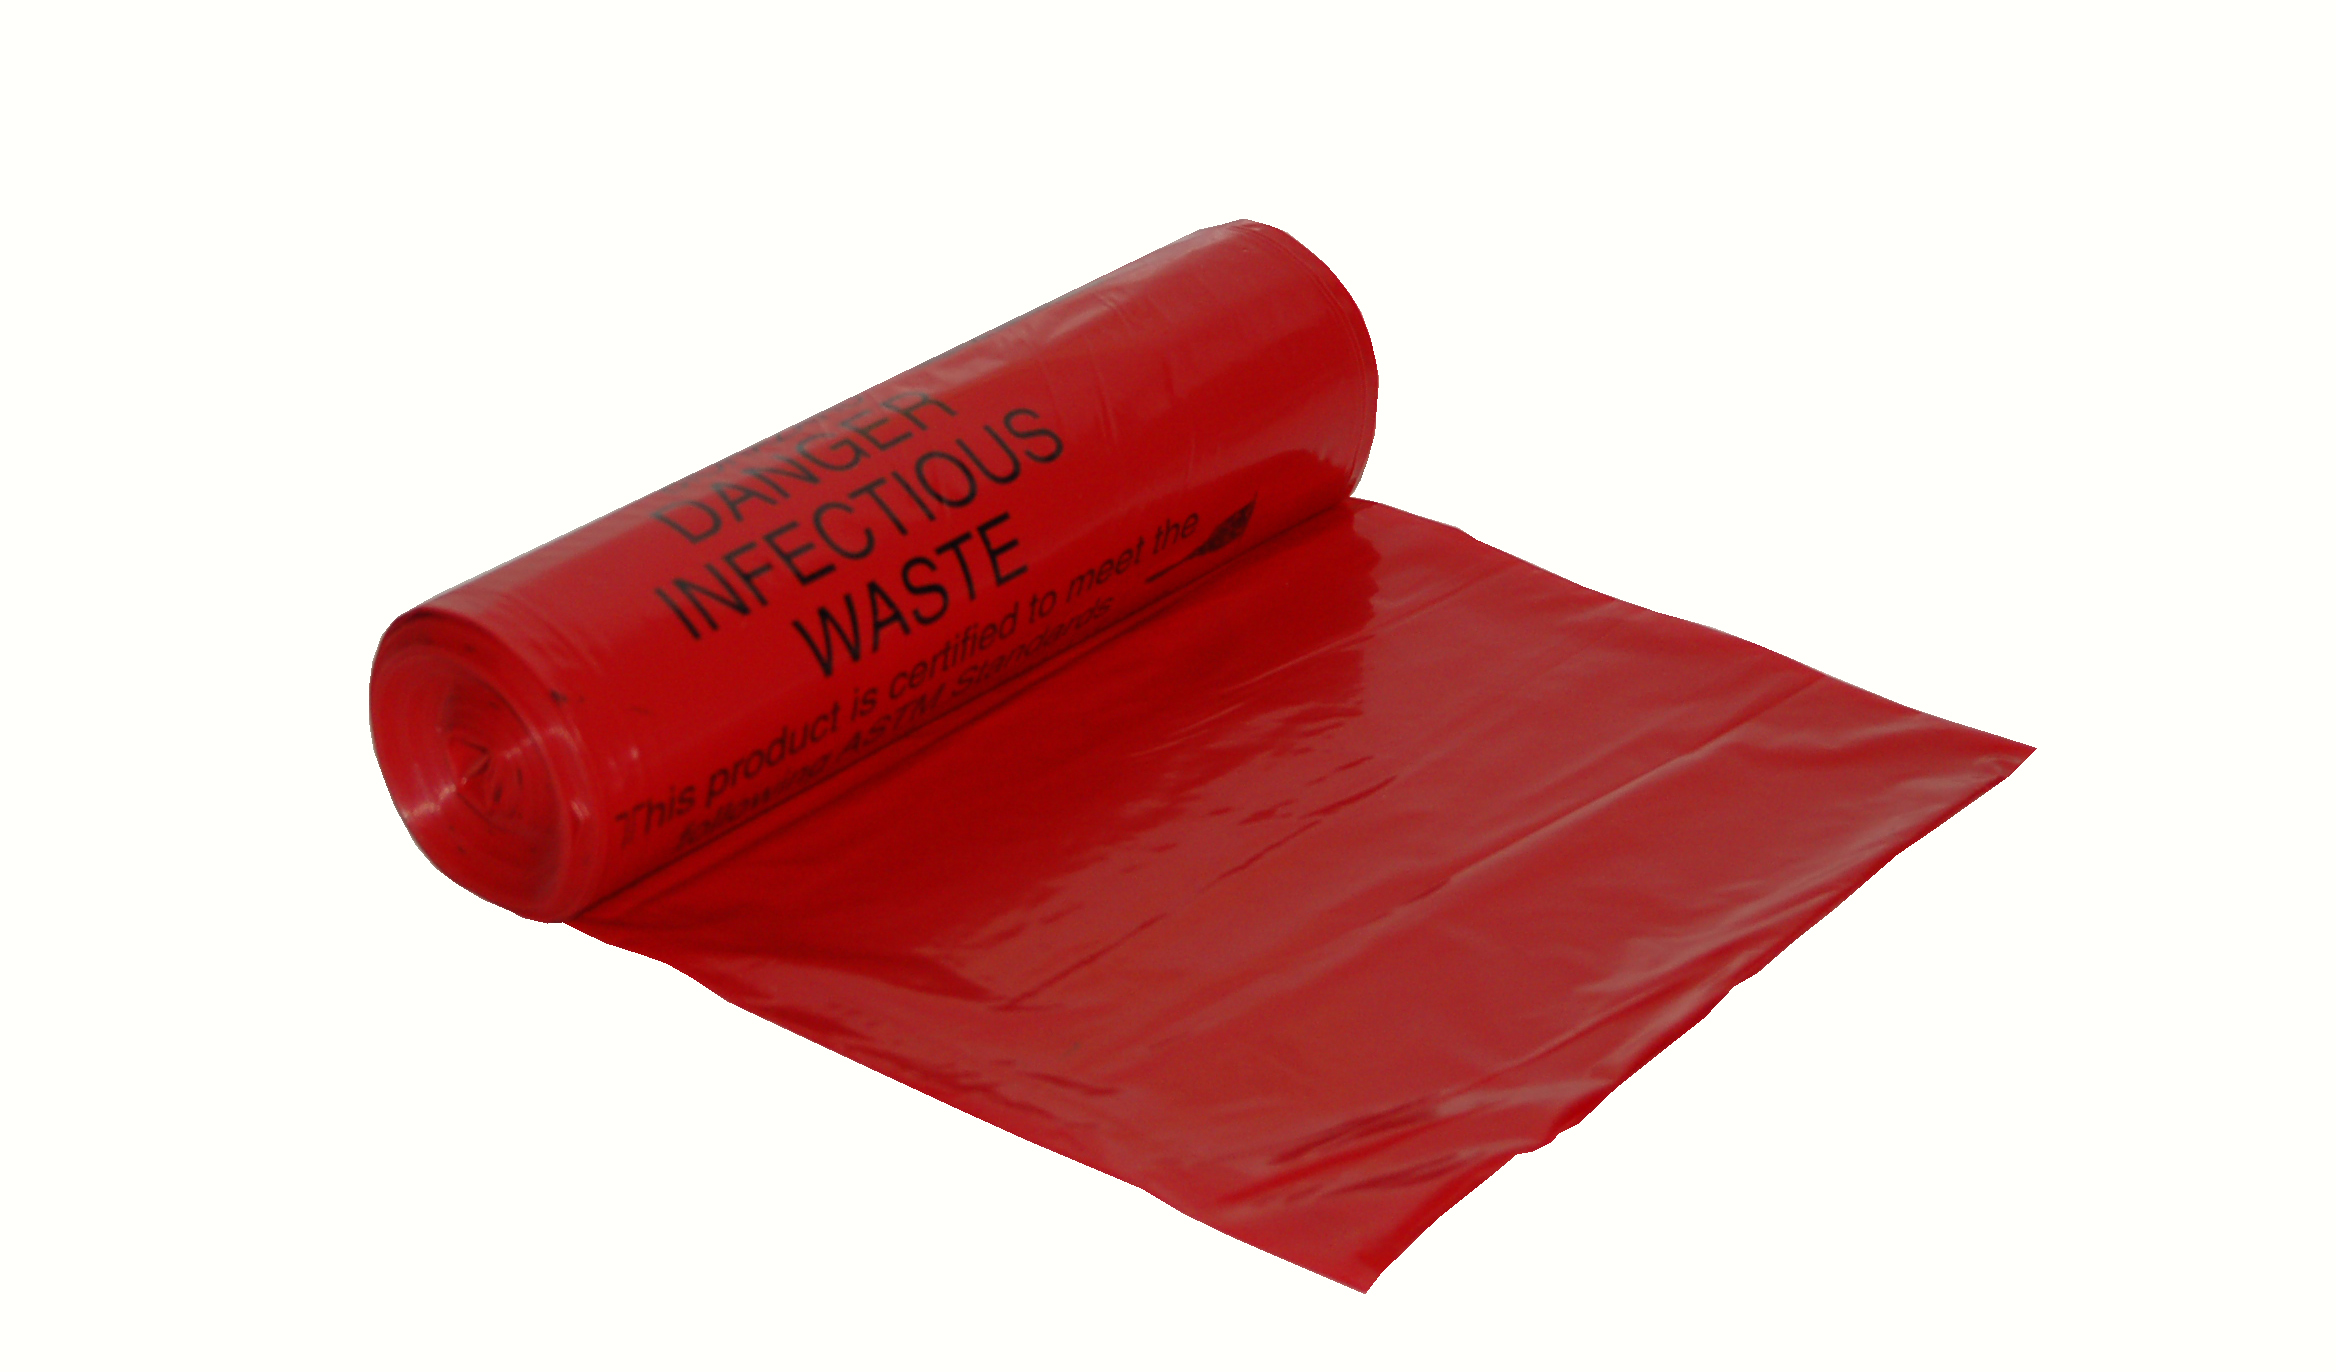 INFECTIOUS WASTE 24X24 1.3
MIL LD POLYLINER- RED (200/CS)